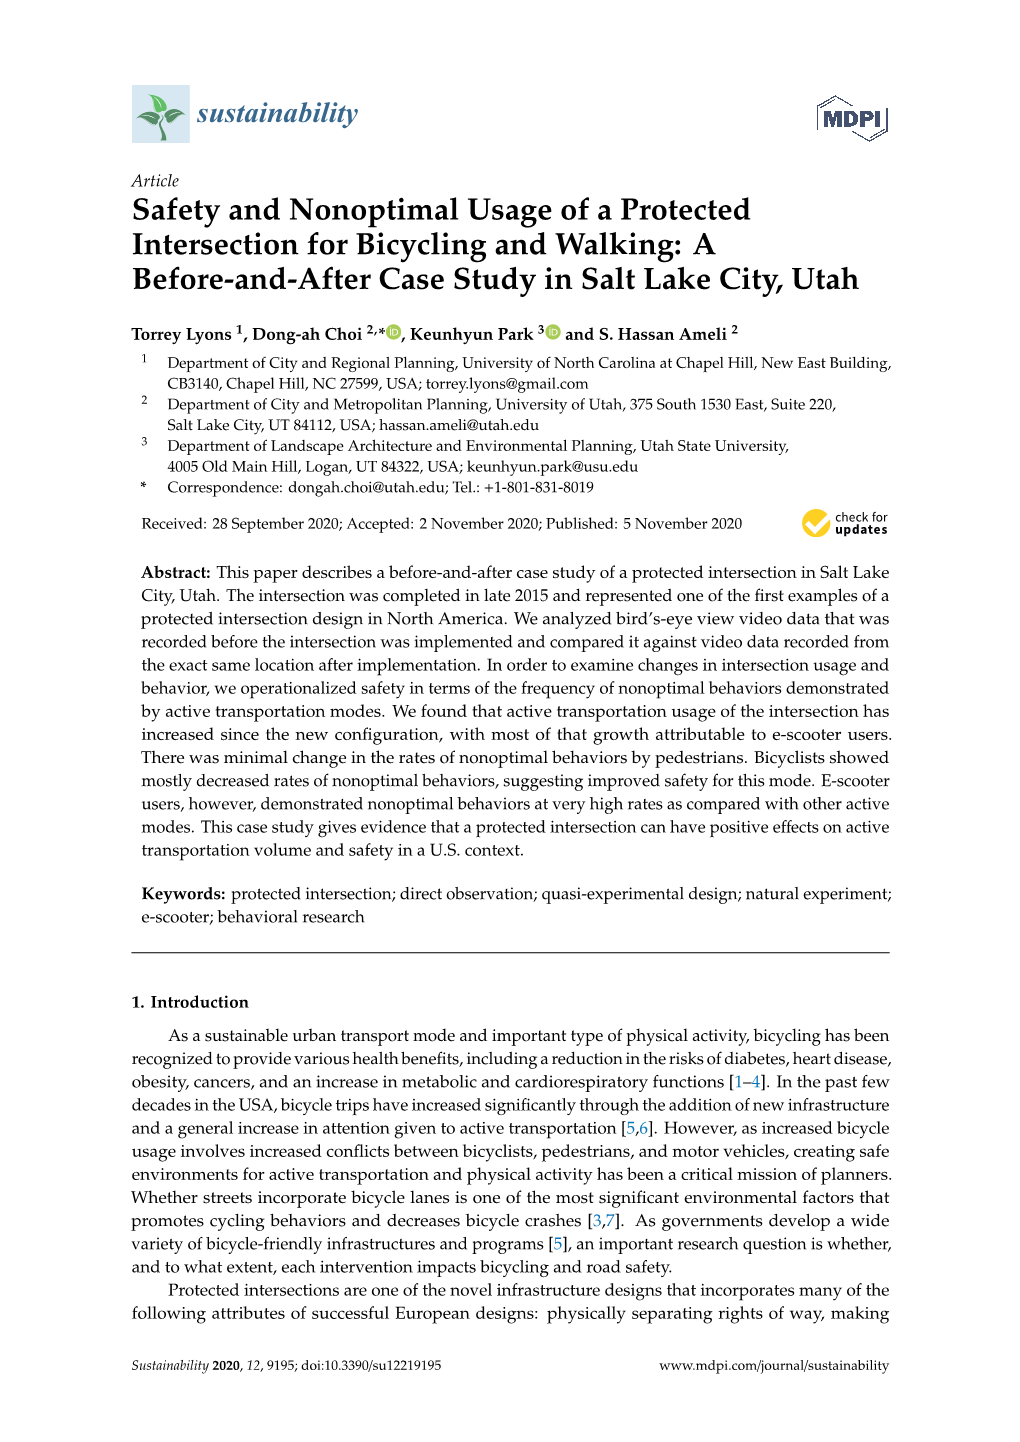 Safety and Nonoptimal Usage of a Protected Intersection for Bicycling and Walking: a Before-And-After Case Study in Salt Lake City, Utah